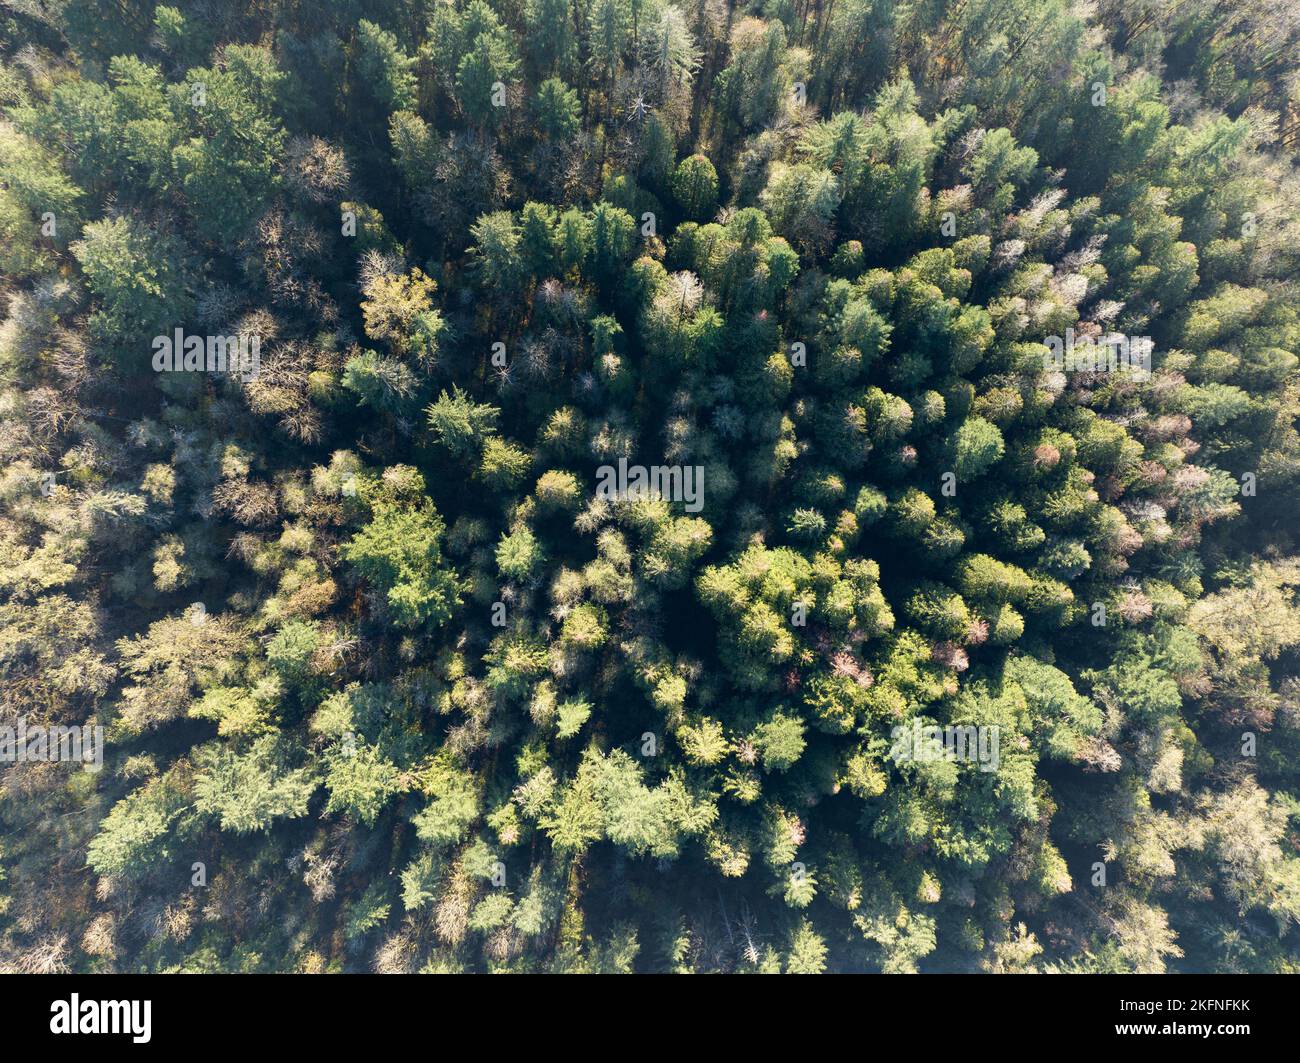 An aerial view shows a healthy forest near Mount Hood, Oregon. Forests cover large swaths of land throughout the Pacific Northwest in the U.S. Stock Photo